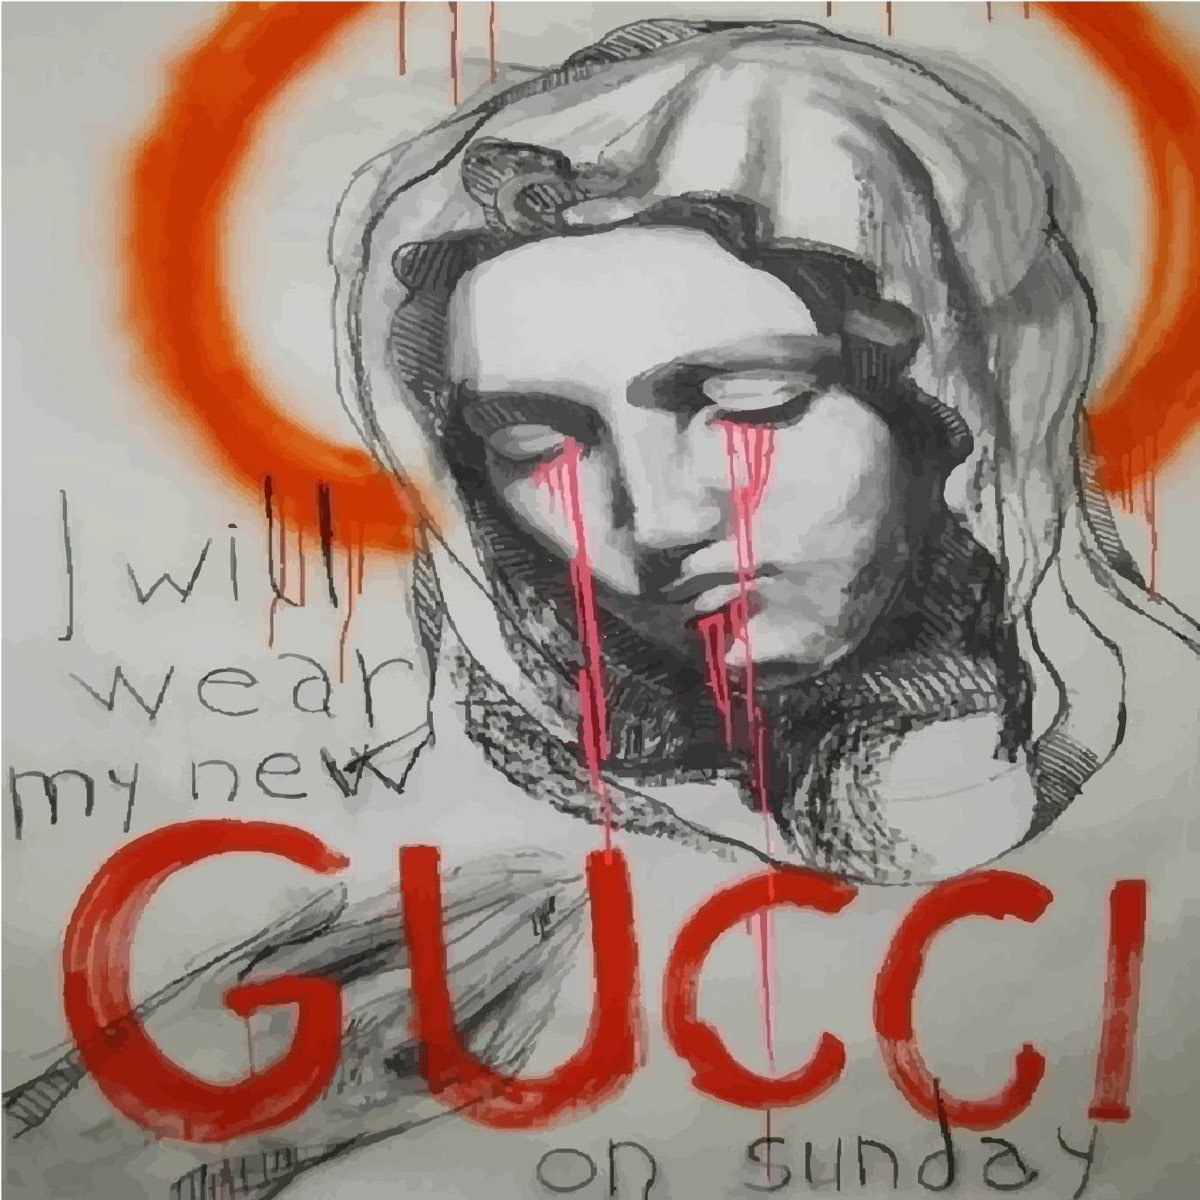 I Will Wear My New Gucci On Sunday - Album by Yung Blood